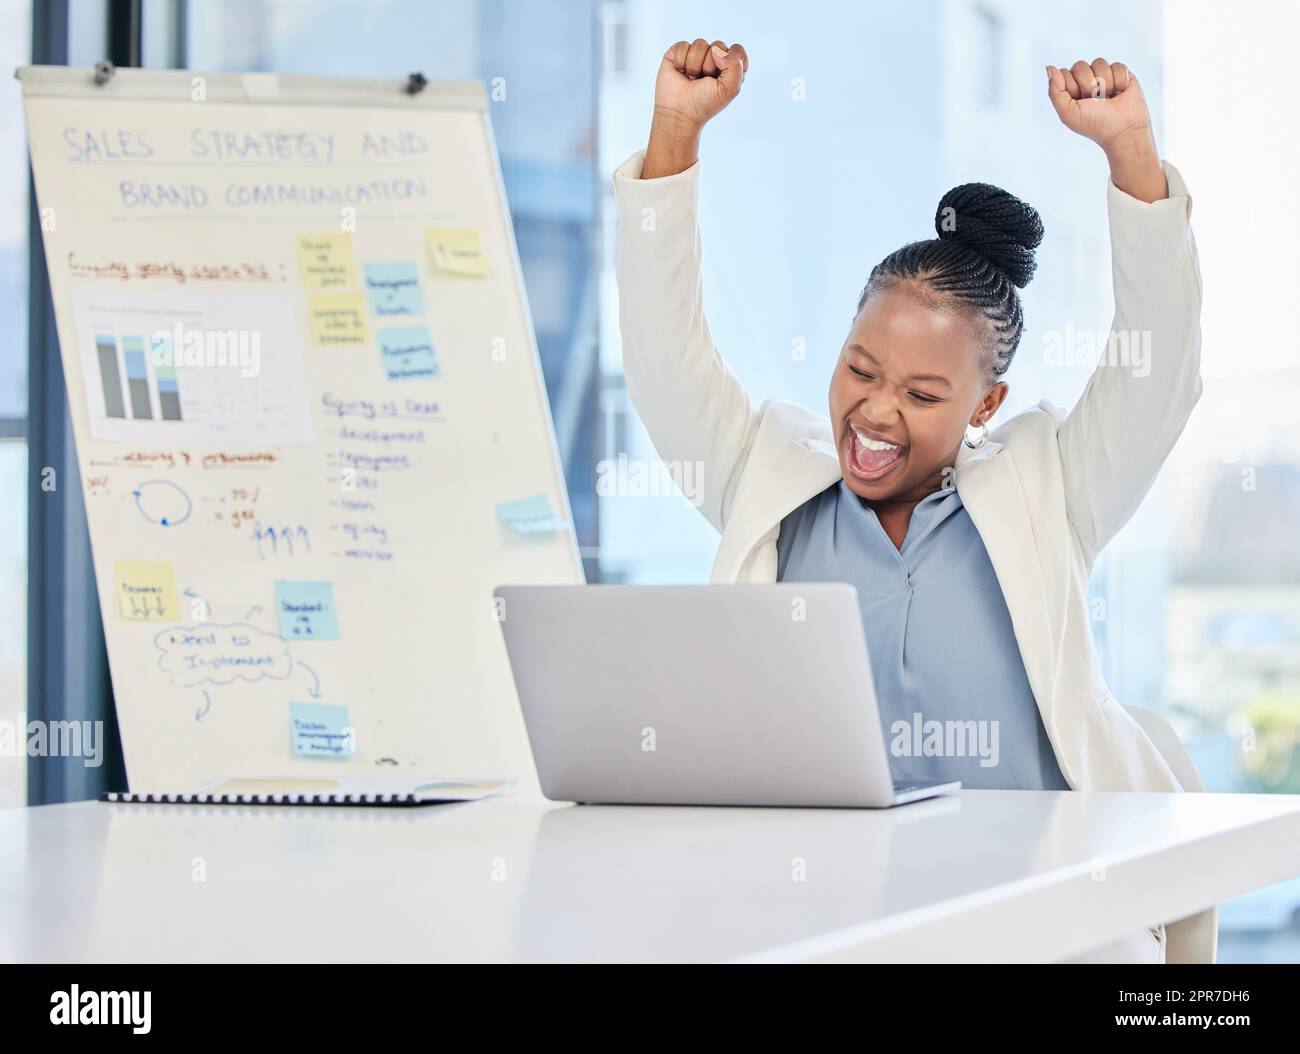 Bring my prize my way. a young businesswoman cheering in excitement while working on her laptop. Stock Photo